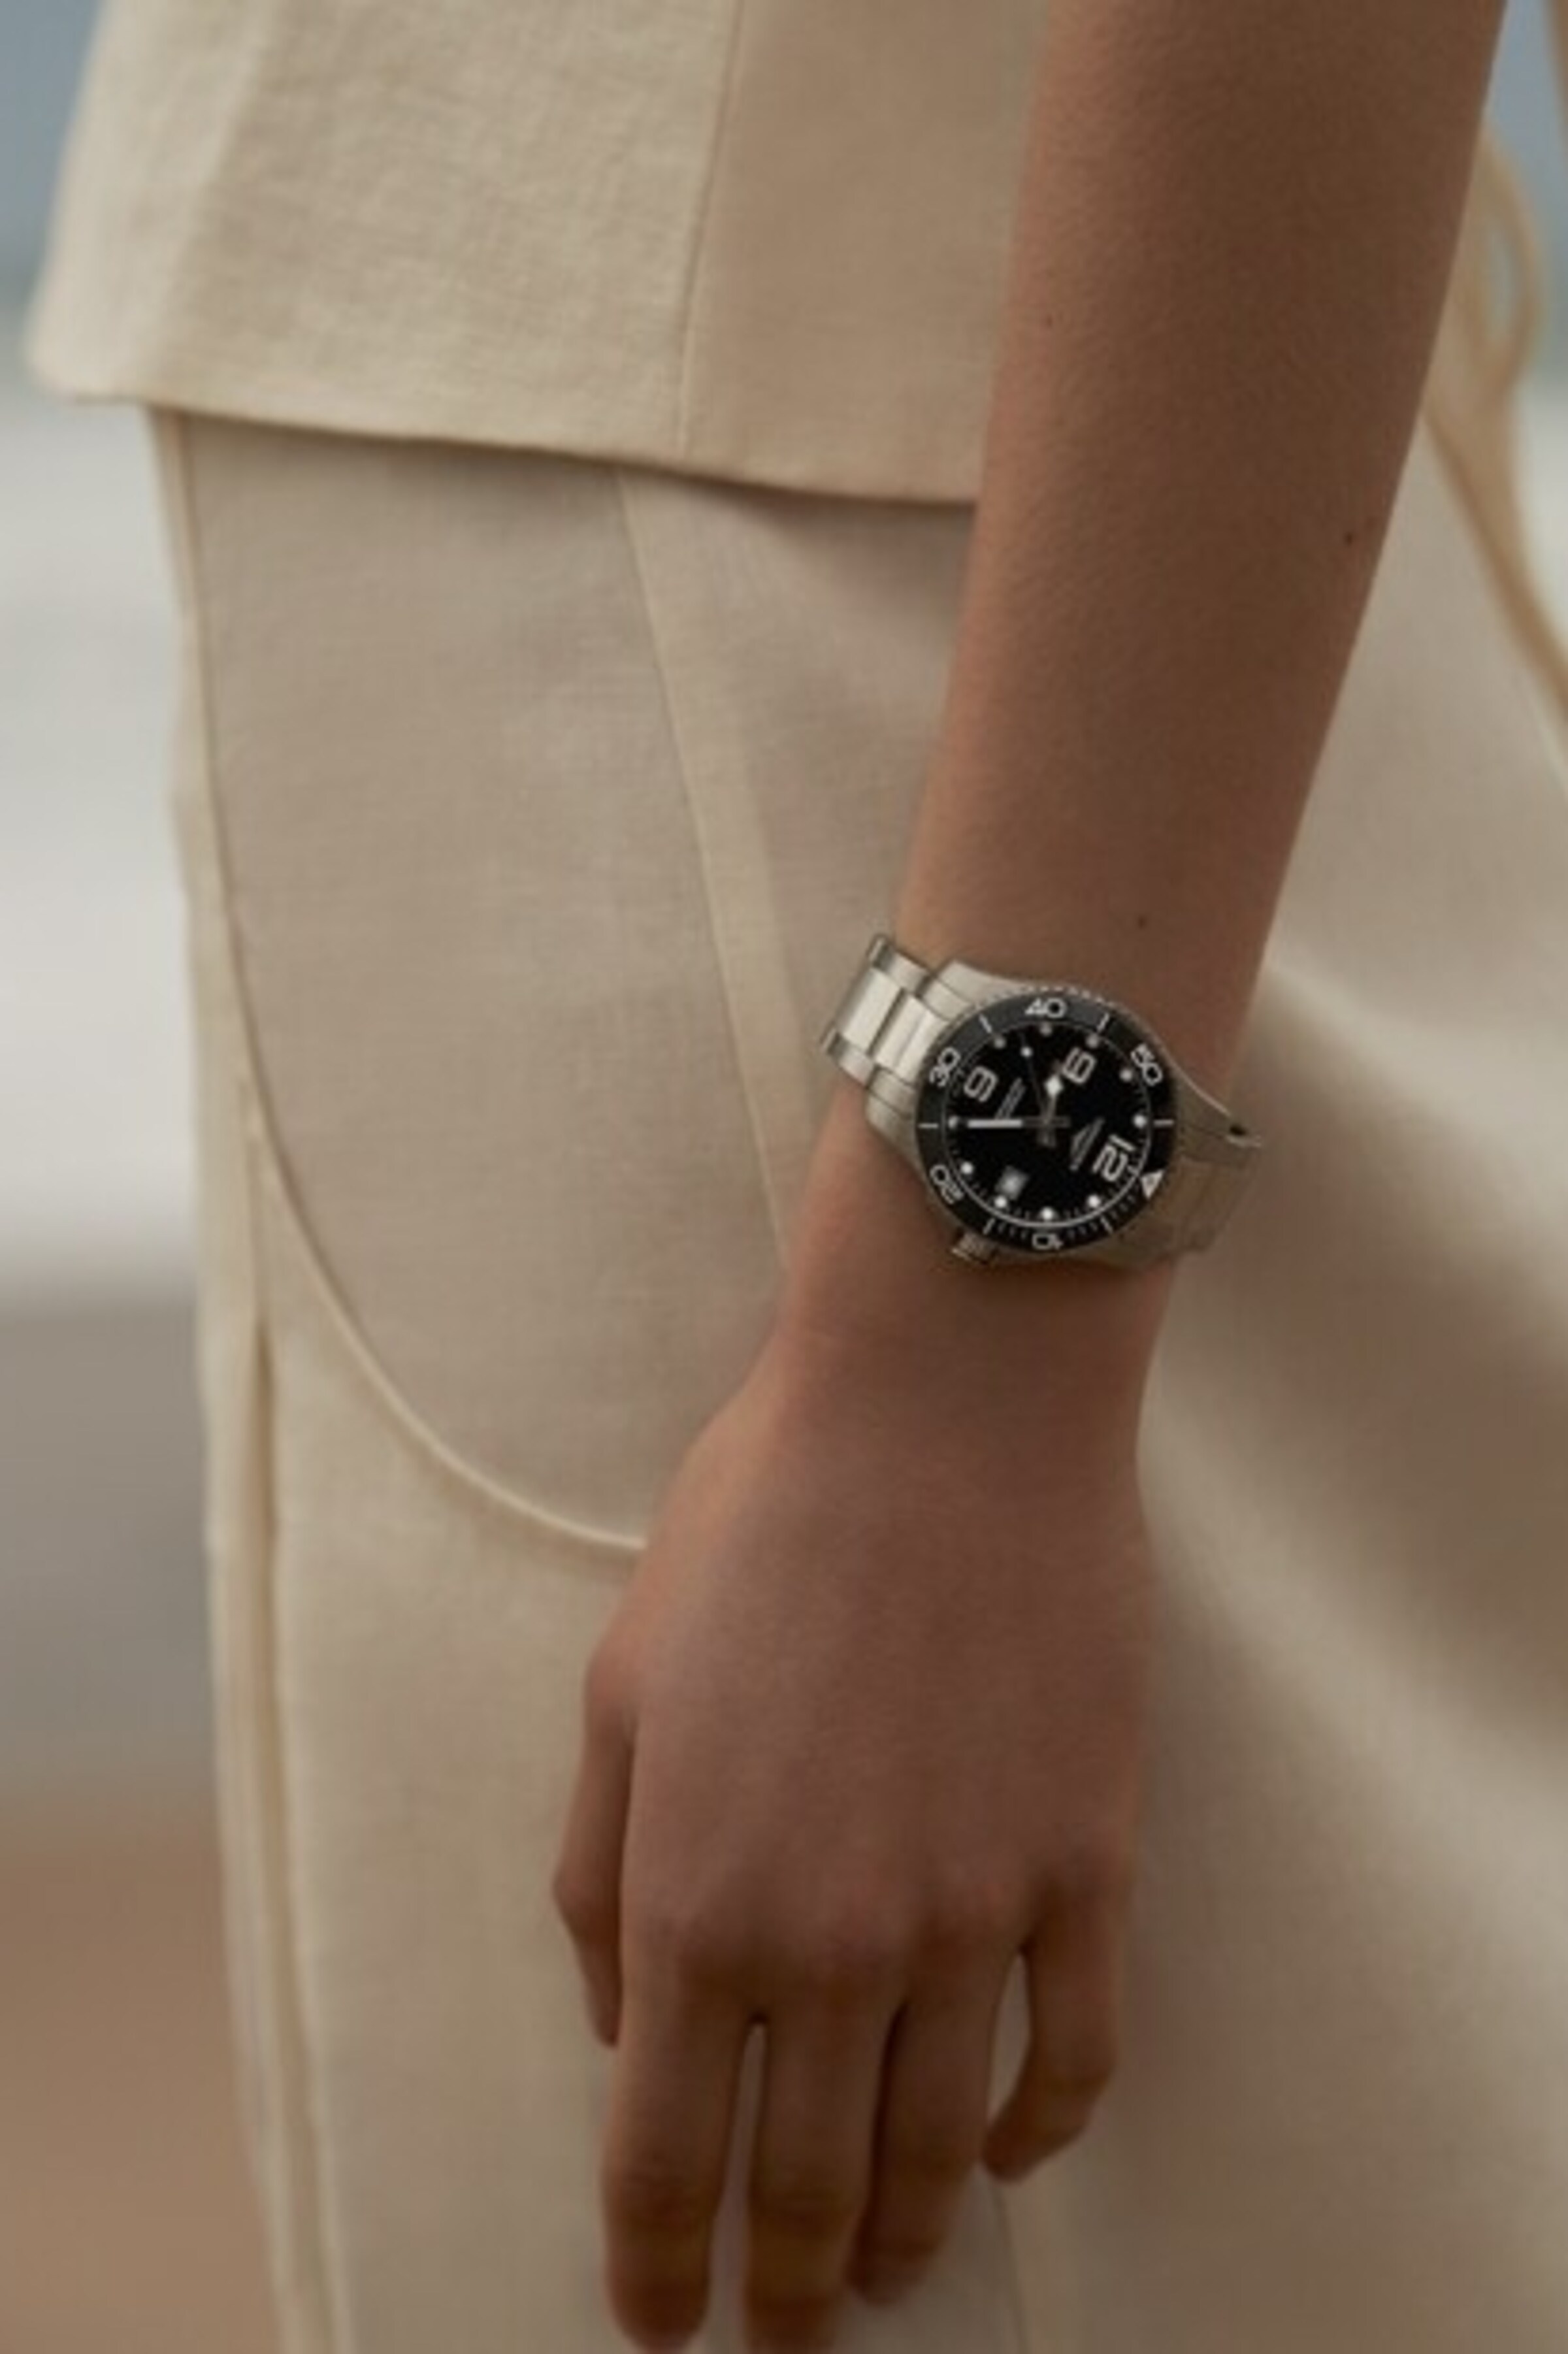 A woman is wearing a Longines Hydroconquest watch